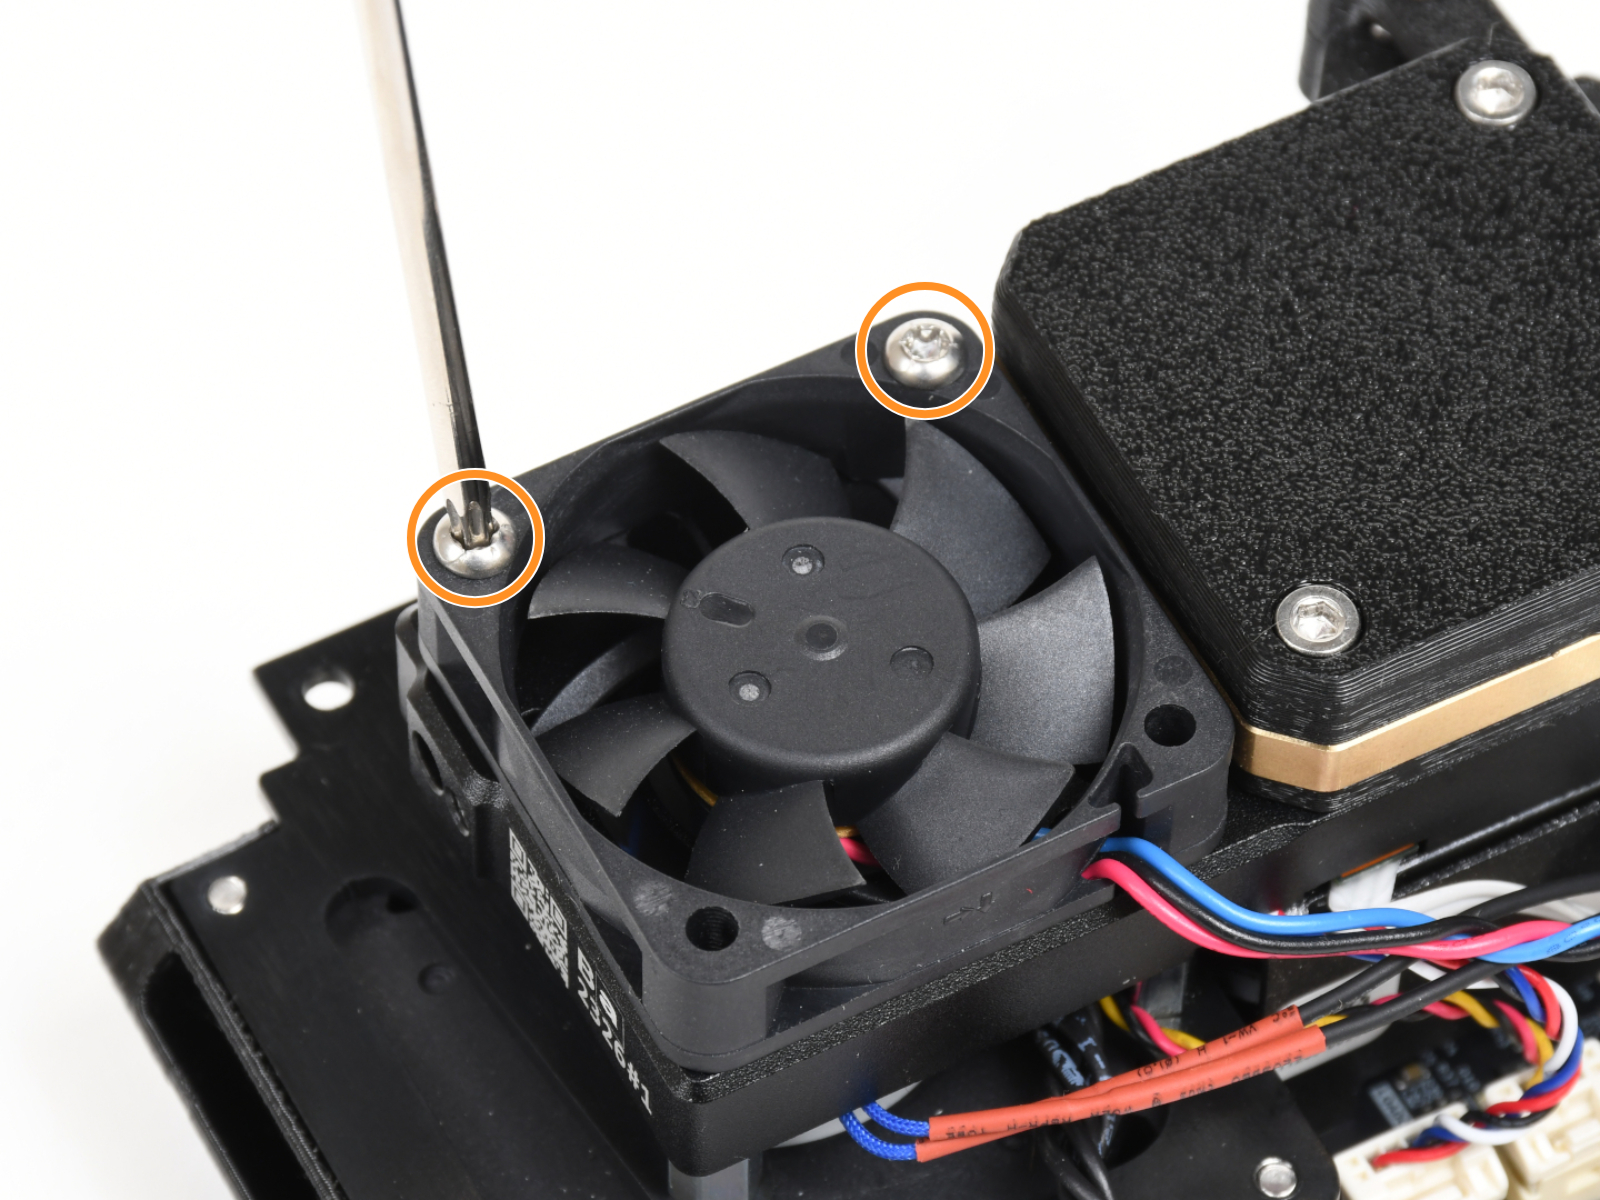 Mounting the new hotend fan